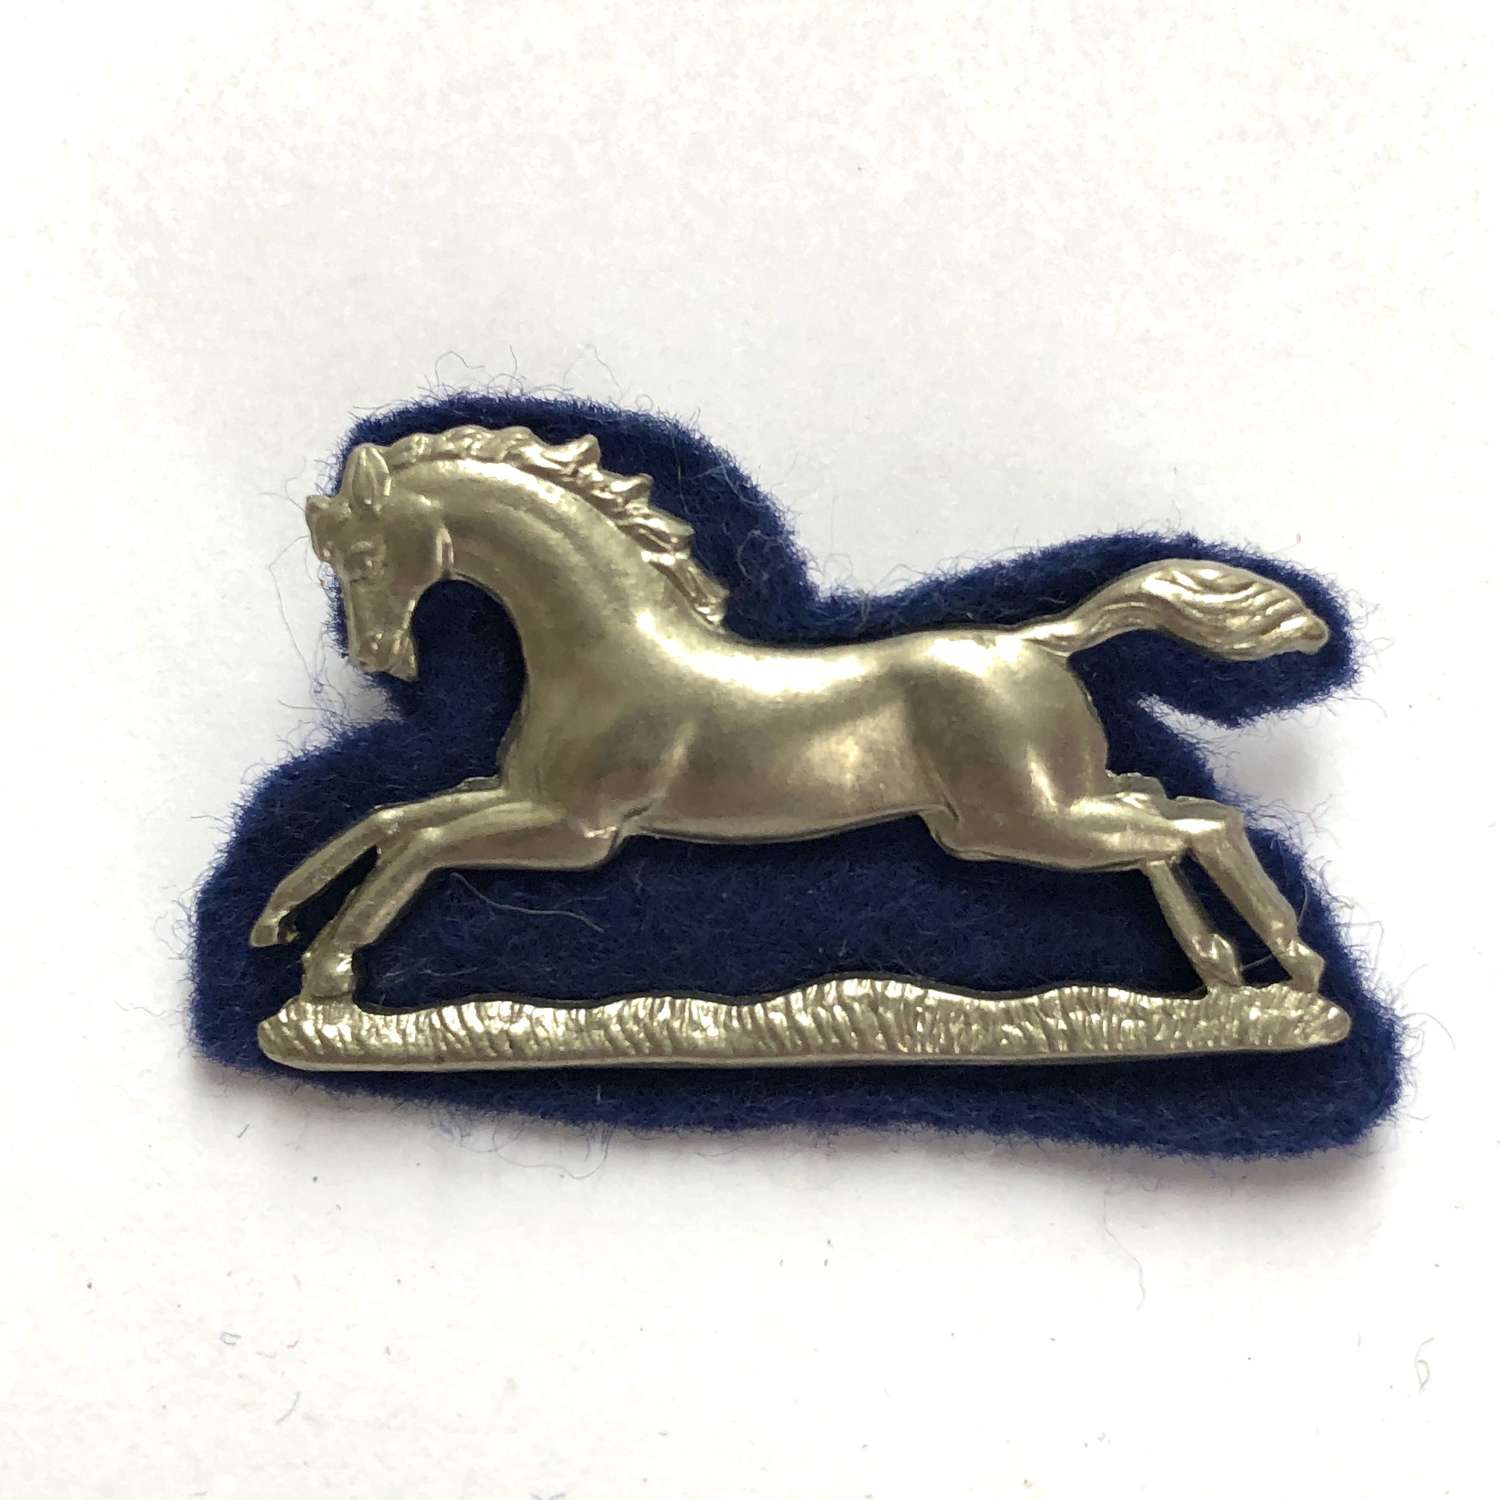 3rd Queen's Own Hussars NCO's arm badge